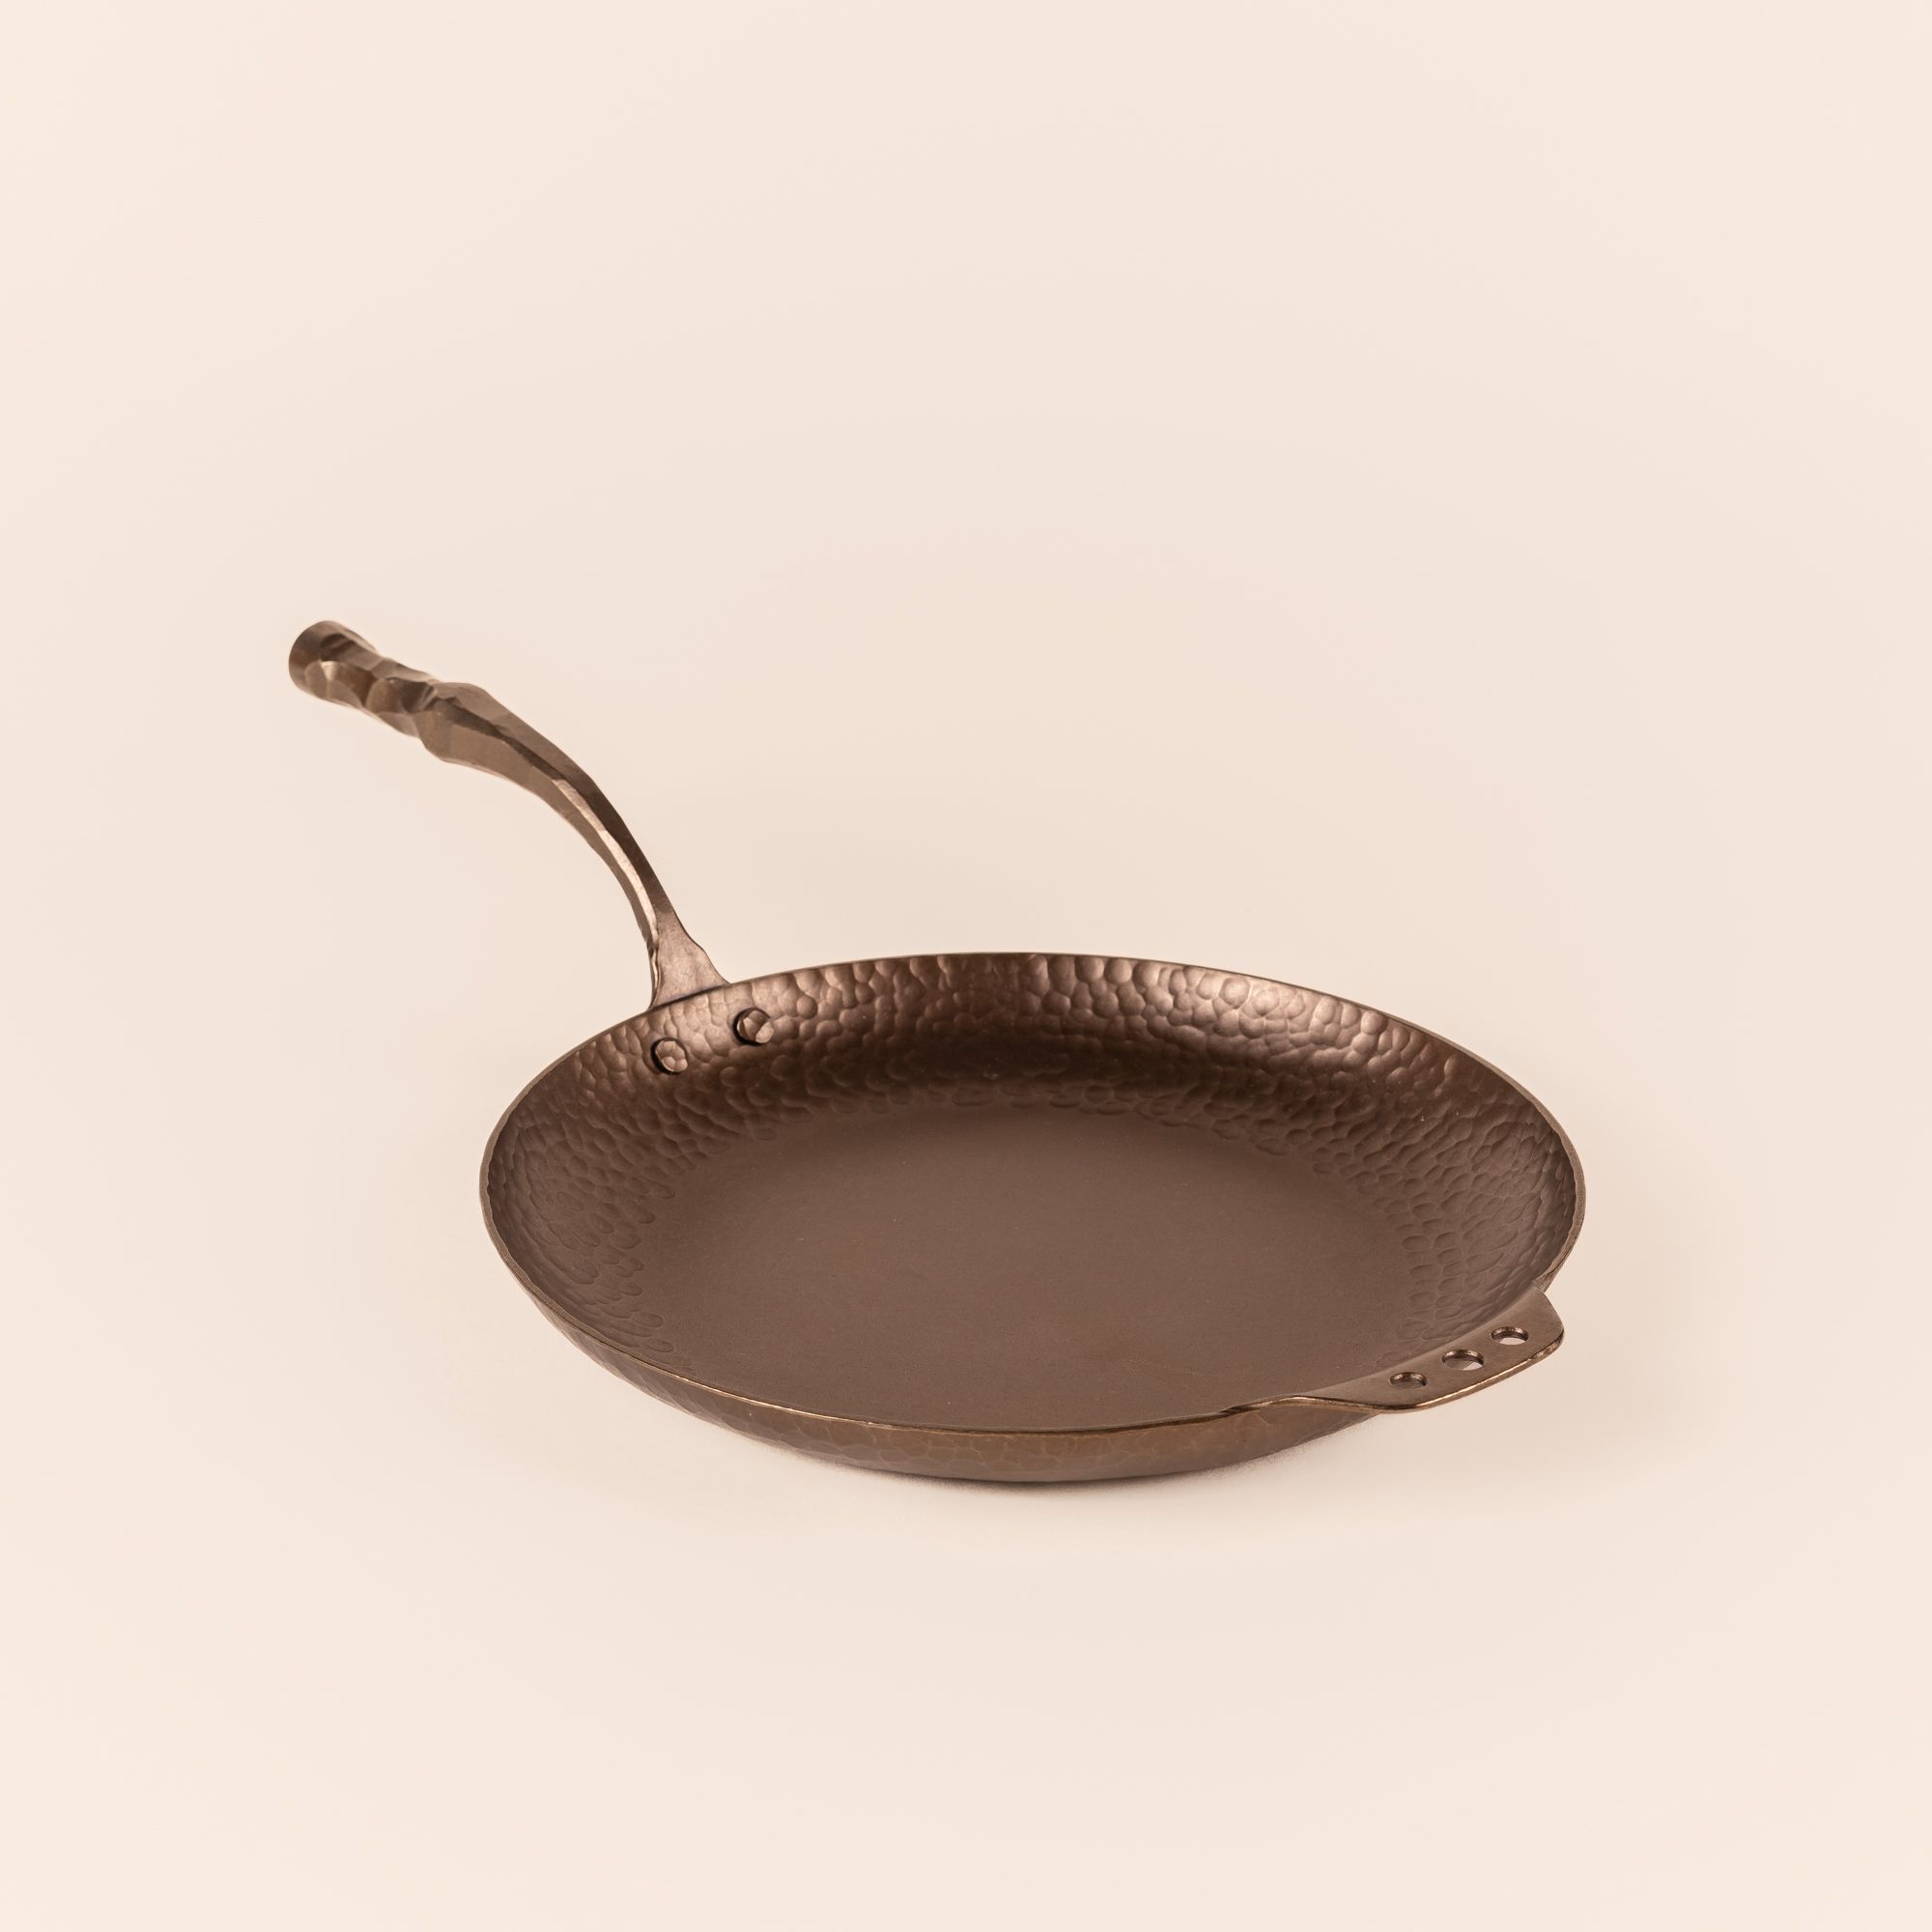 A carbon steel farmhouse skillet with a hammered texture and hand forged design